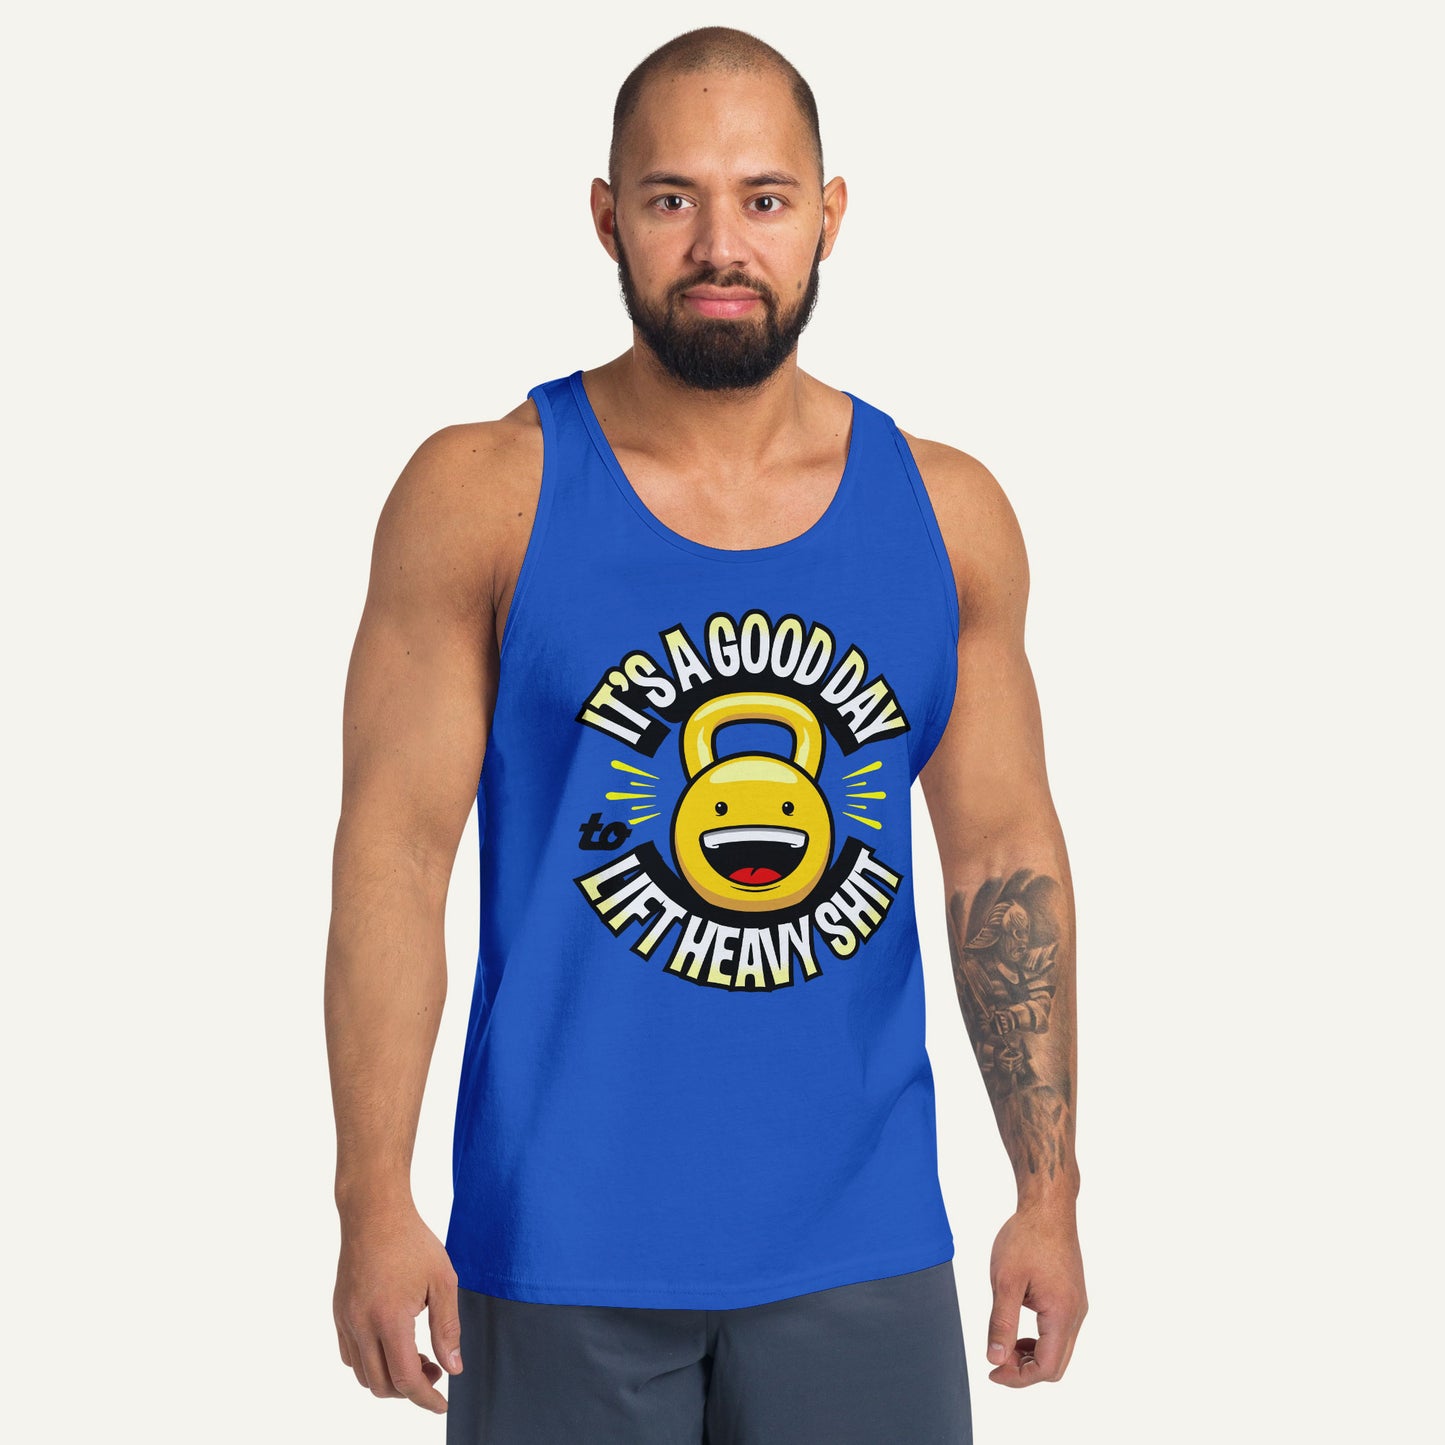 It’s A Good Day To Lift Heavy Shit Men’s Tank Top